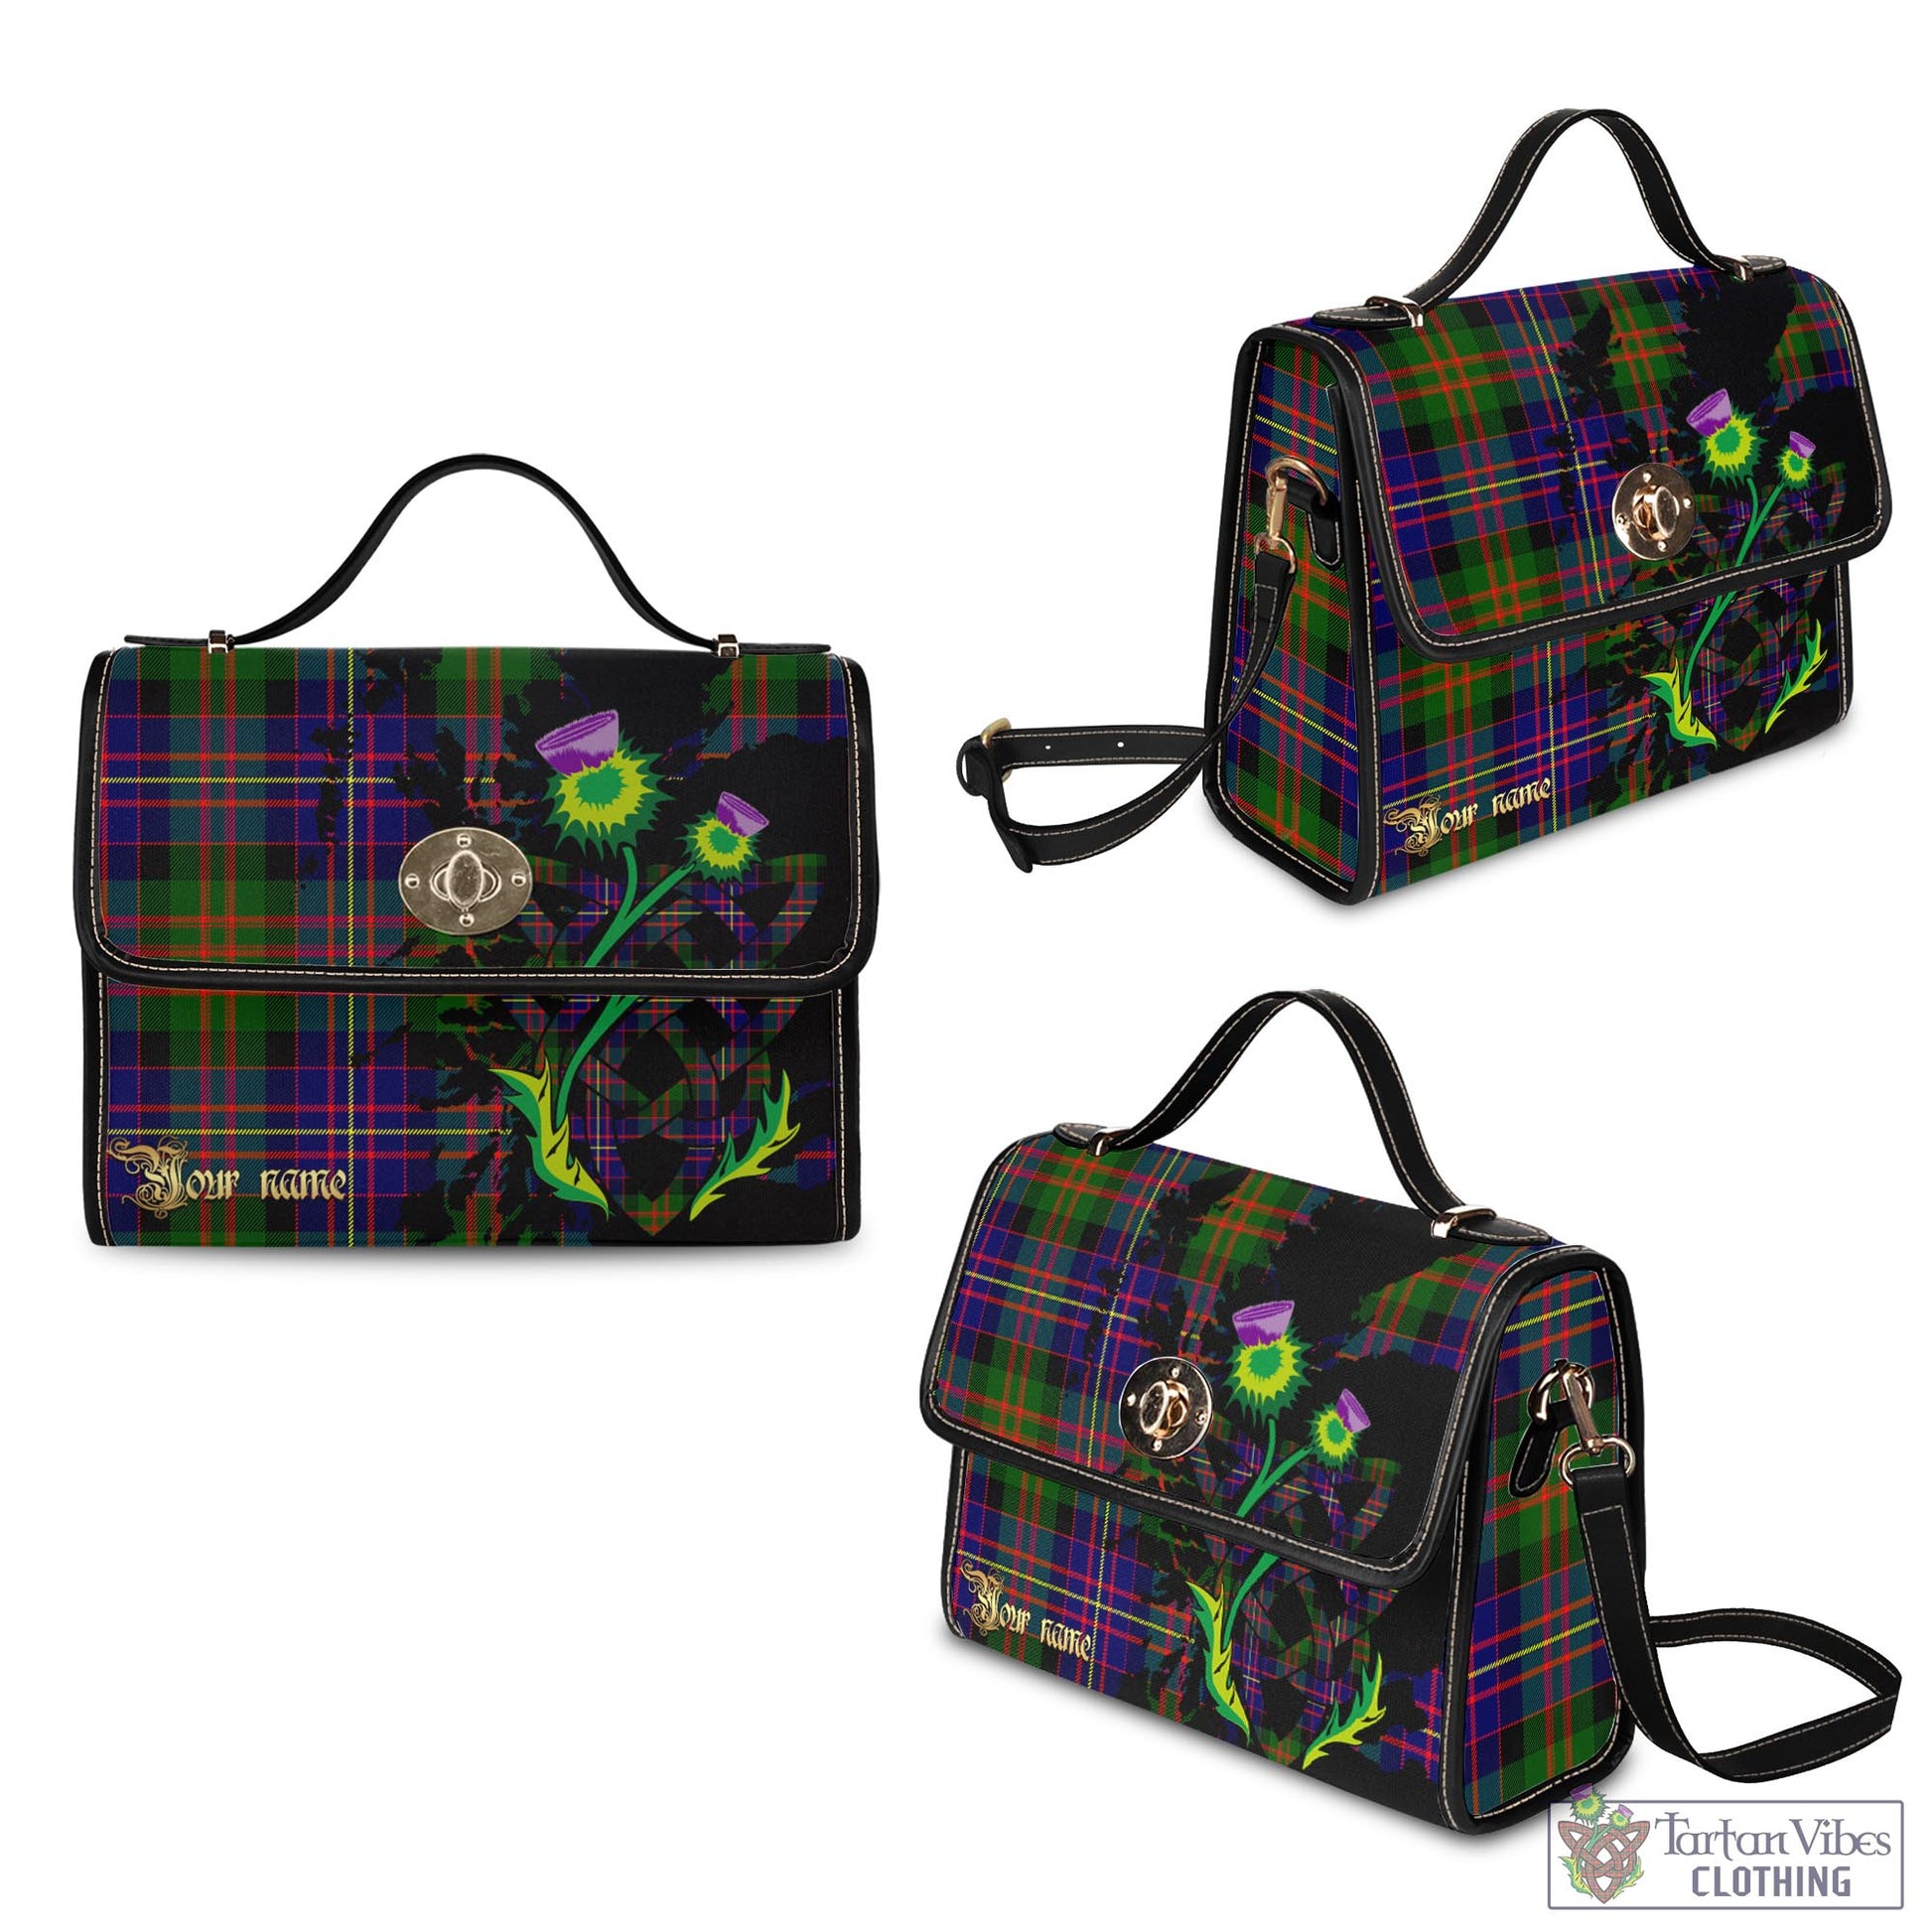 Tartan Vibes Clothing Chalmers Modern Tartan Waterproof Canvas Bag with Scotland Map and Thistle Celtic Accents